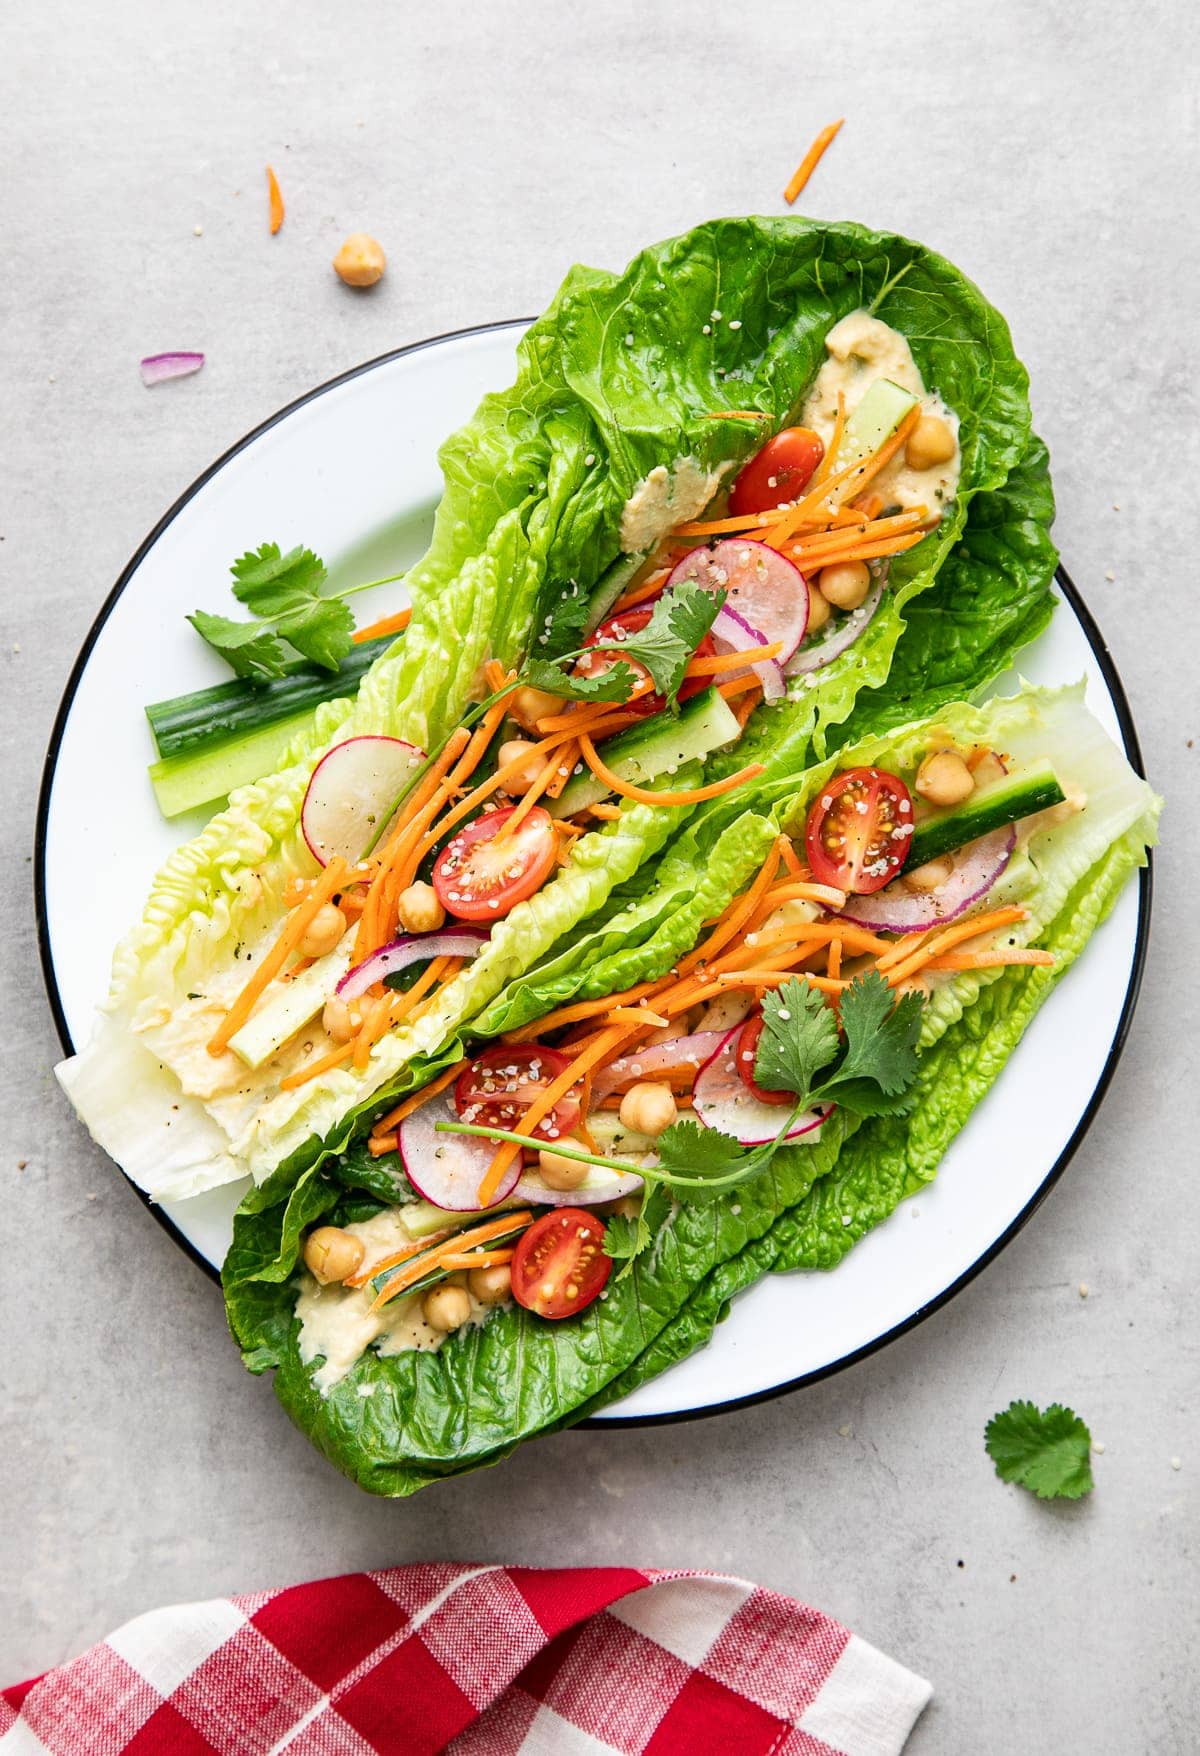 top down view of light and healthy, fresh vegan lettuce wraps on a plate with items surrounding.